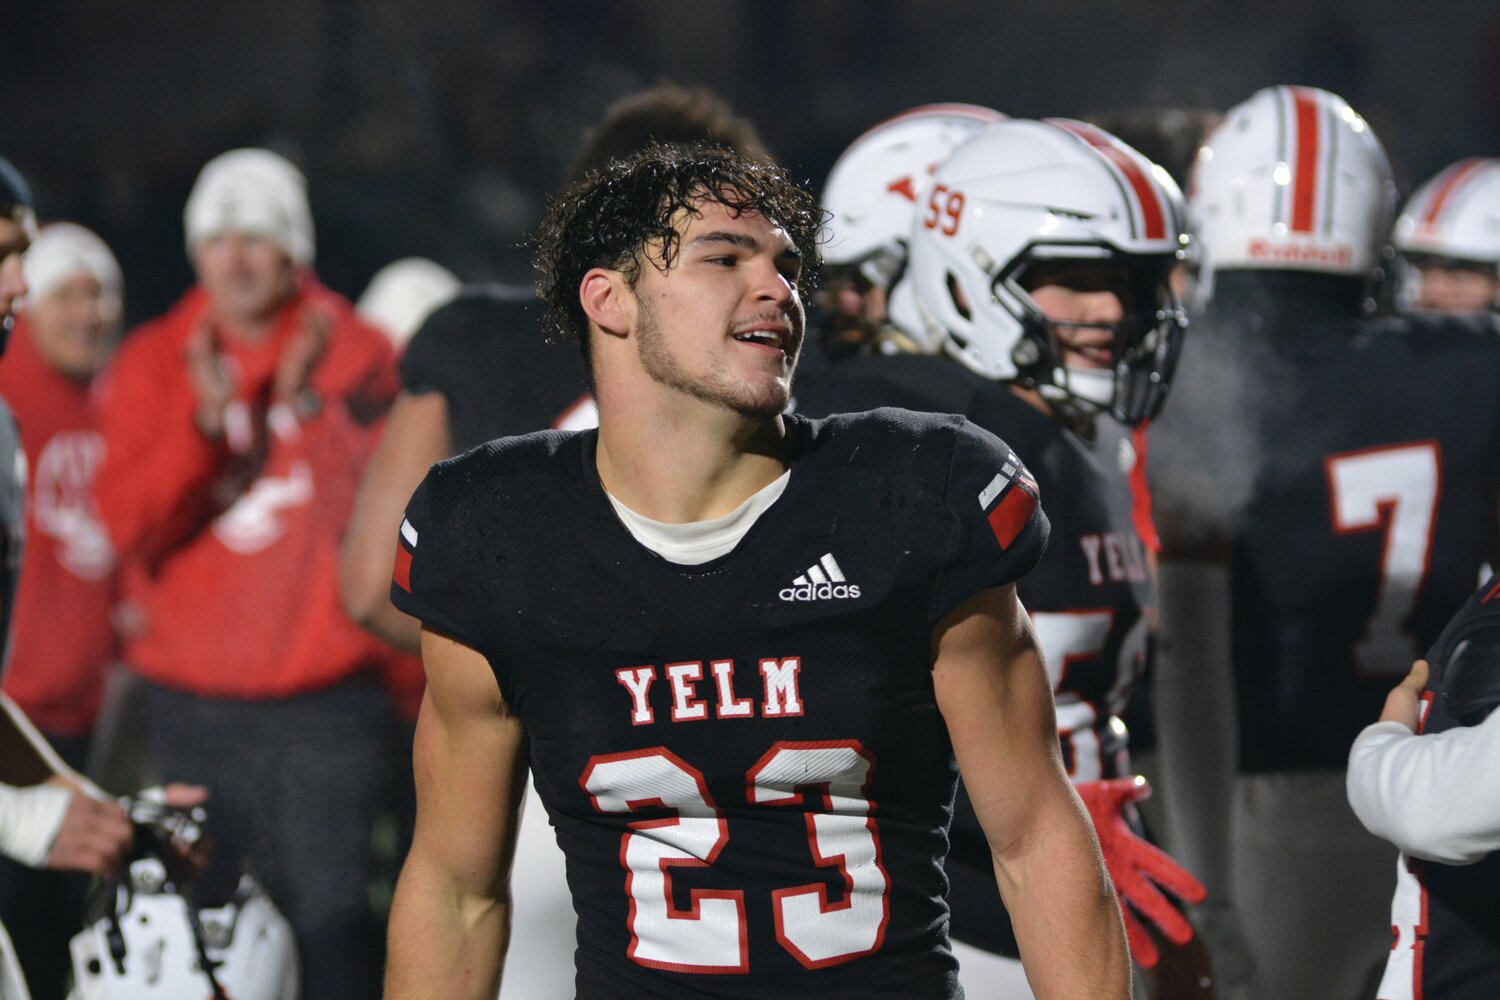 Yelm’s All American linebacker Brayden Platt smiles after defeating Eastside Catholic on Nov. 25 to advance to the 3A State Championship game.